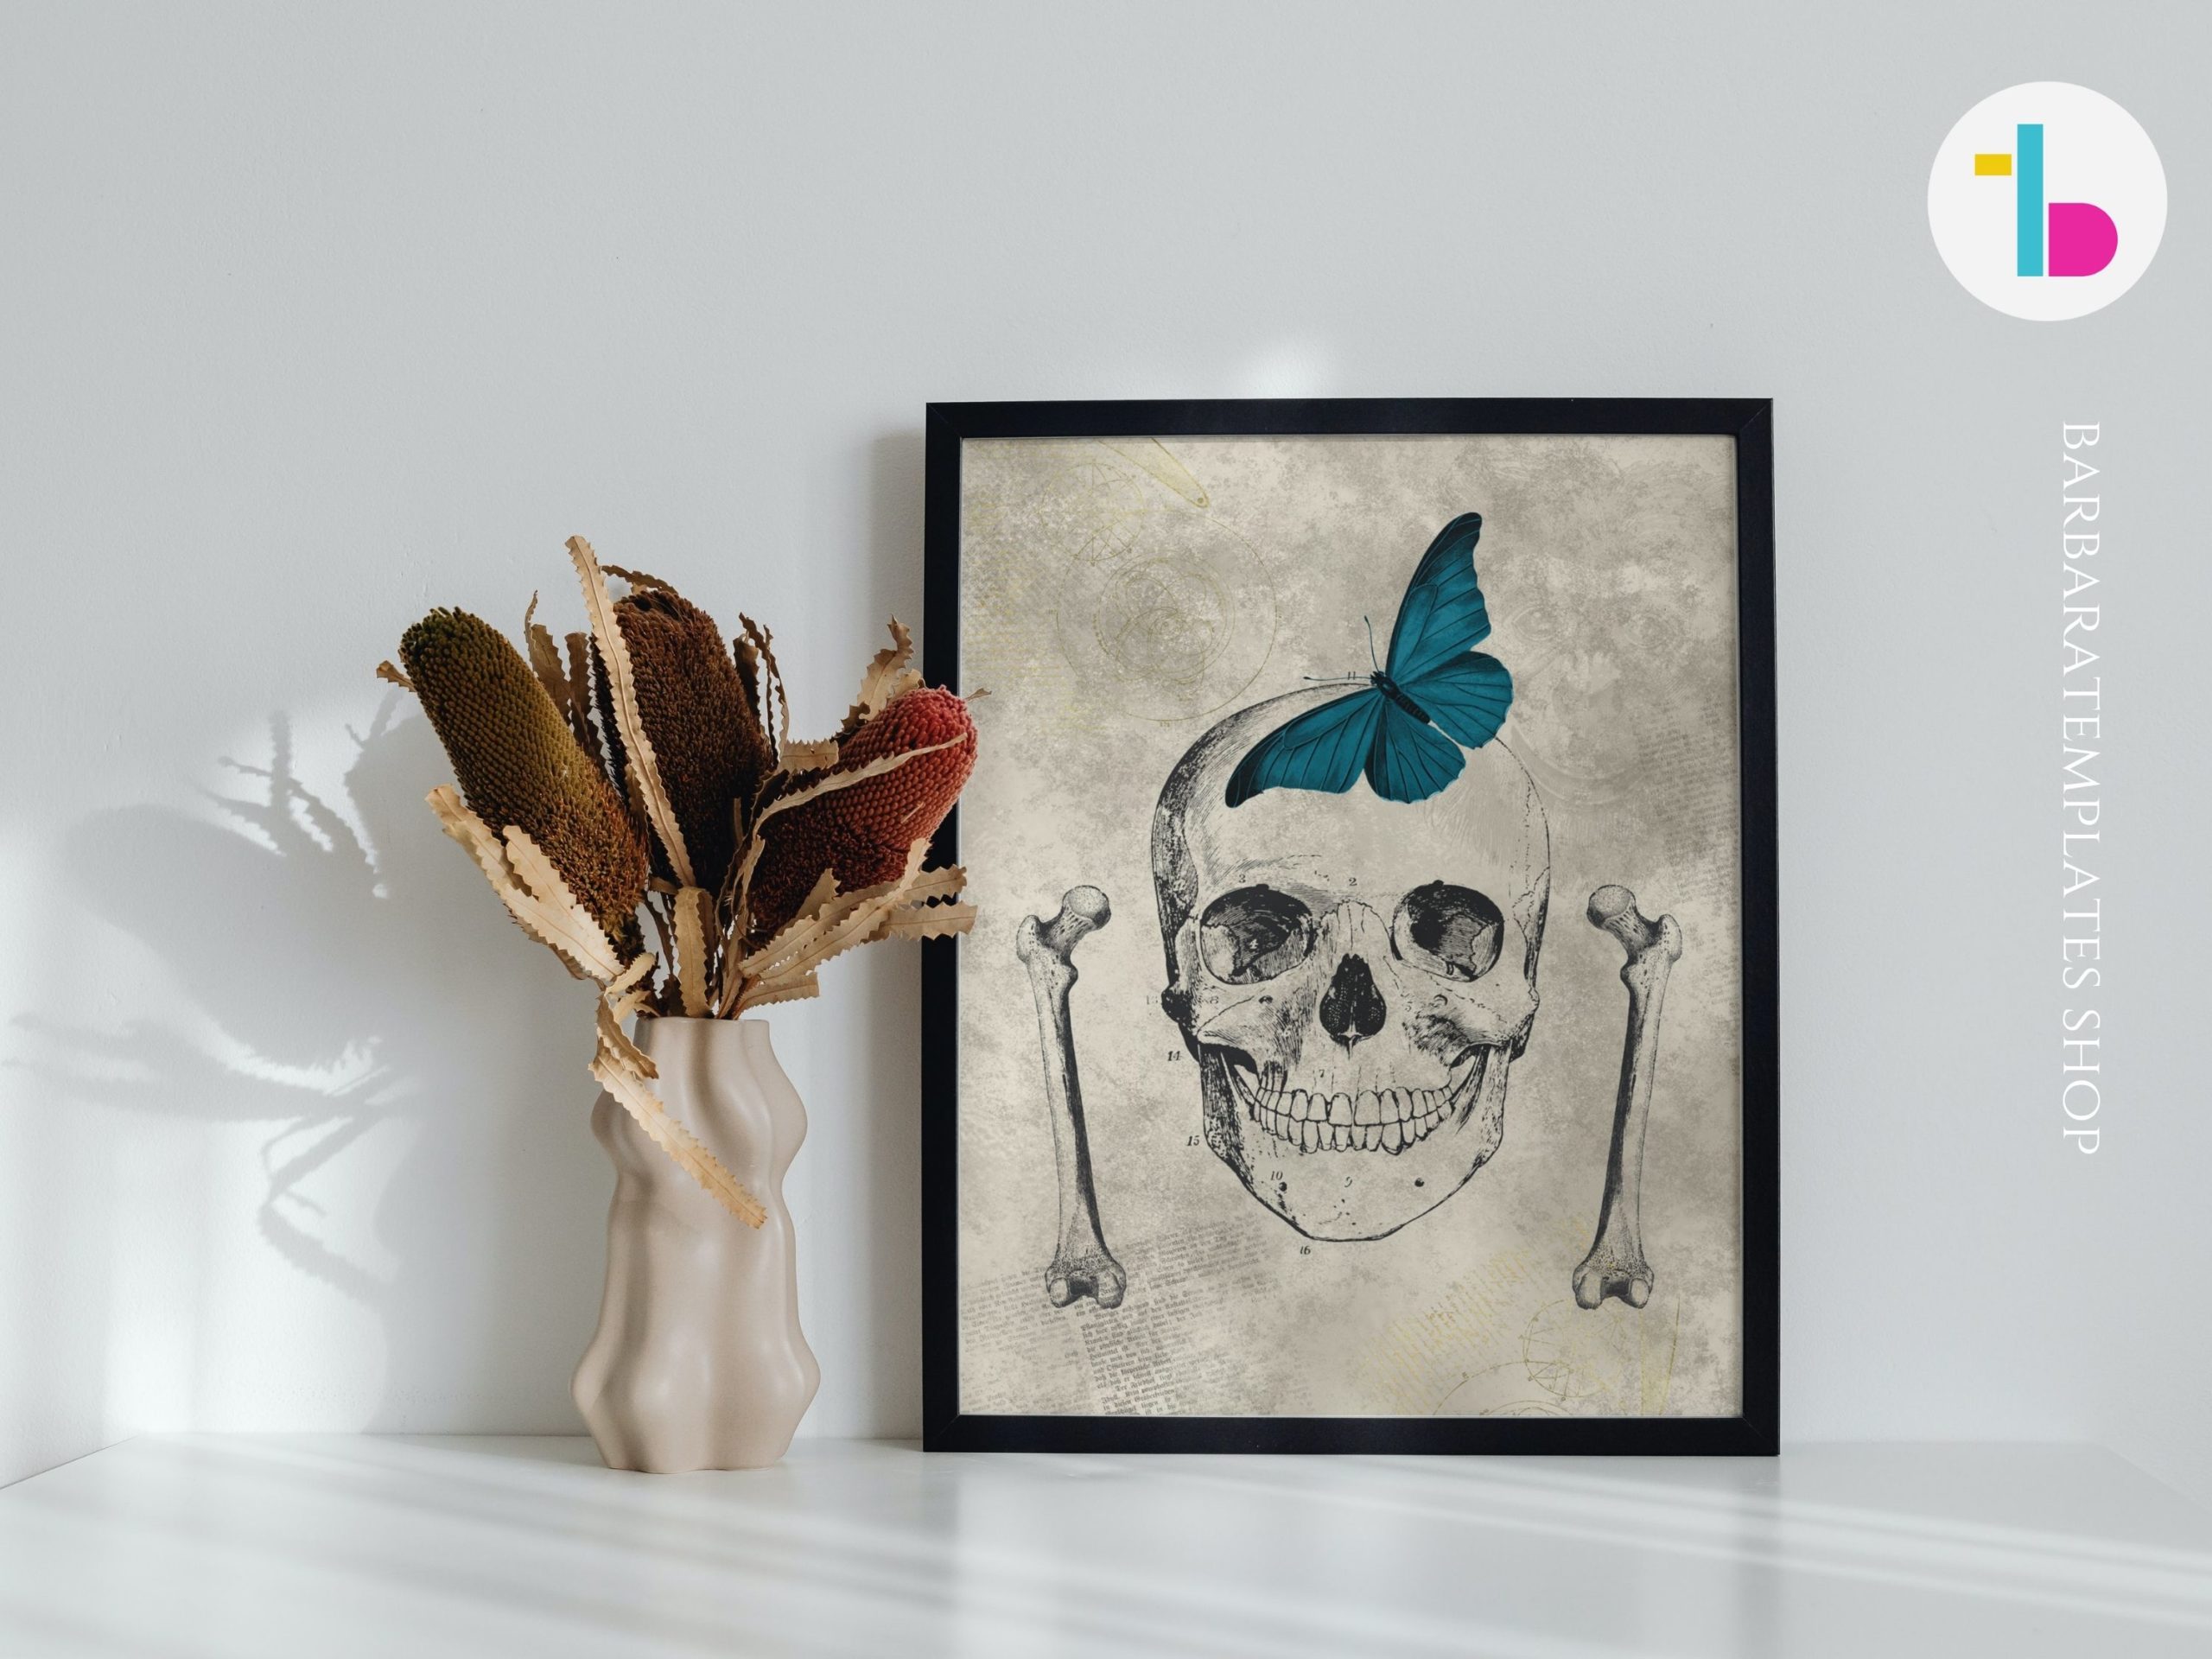 Gothic human skull digital print with blue butterfly